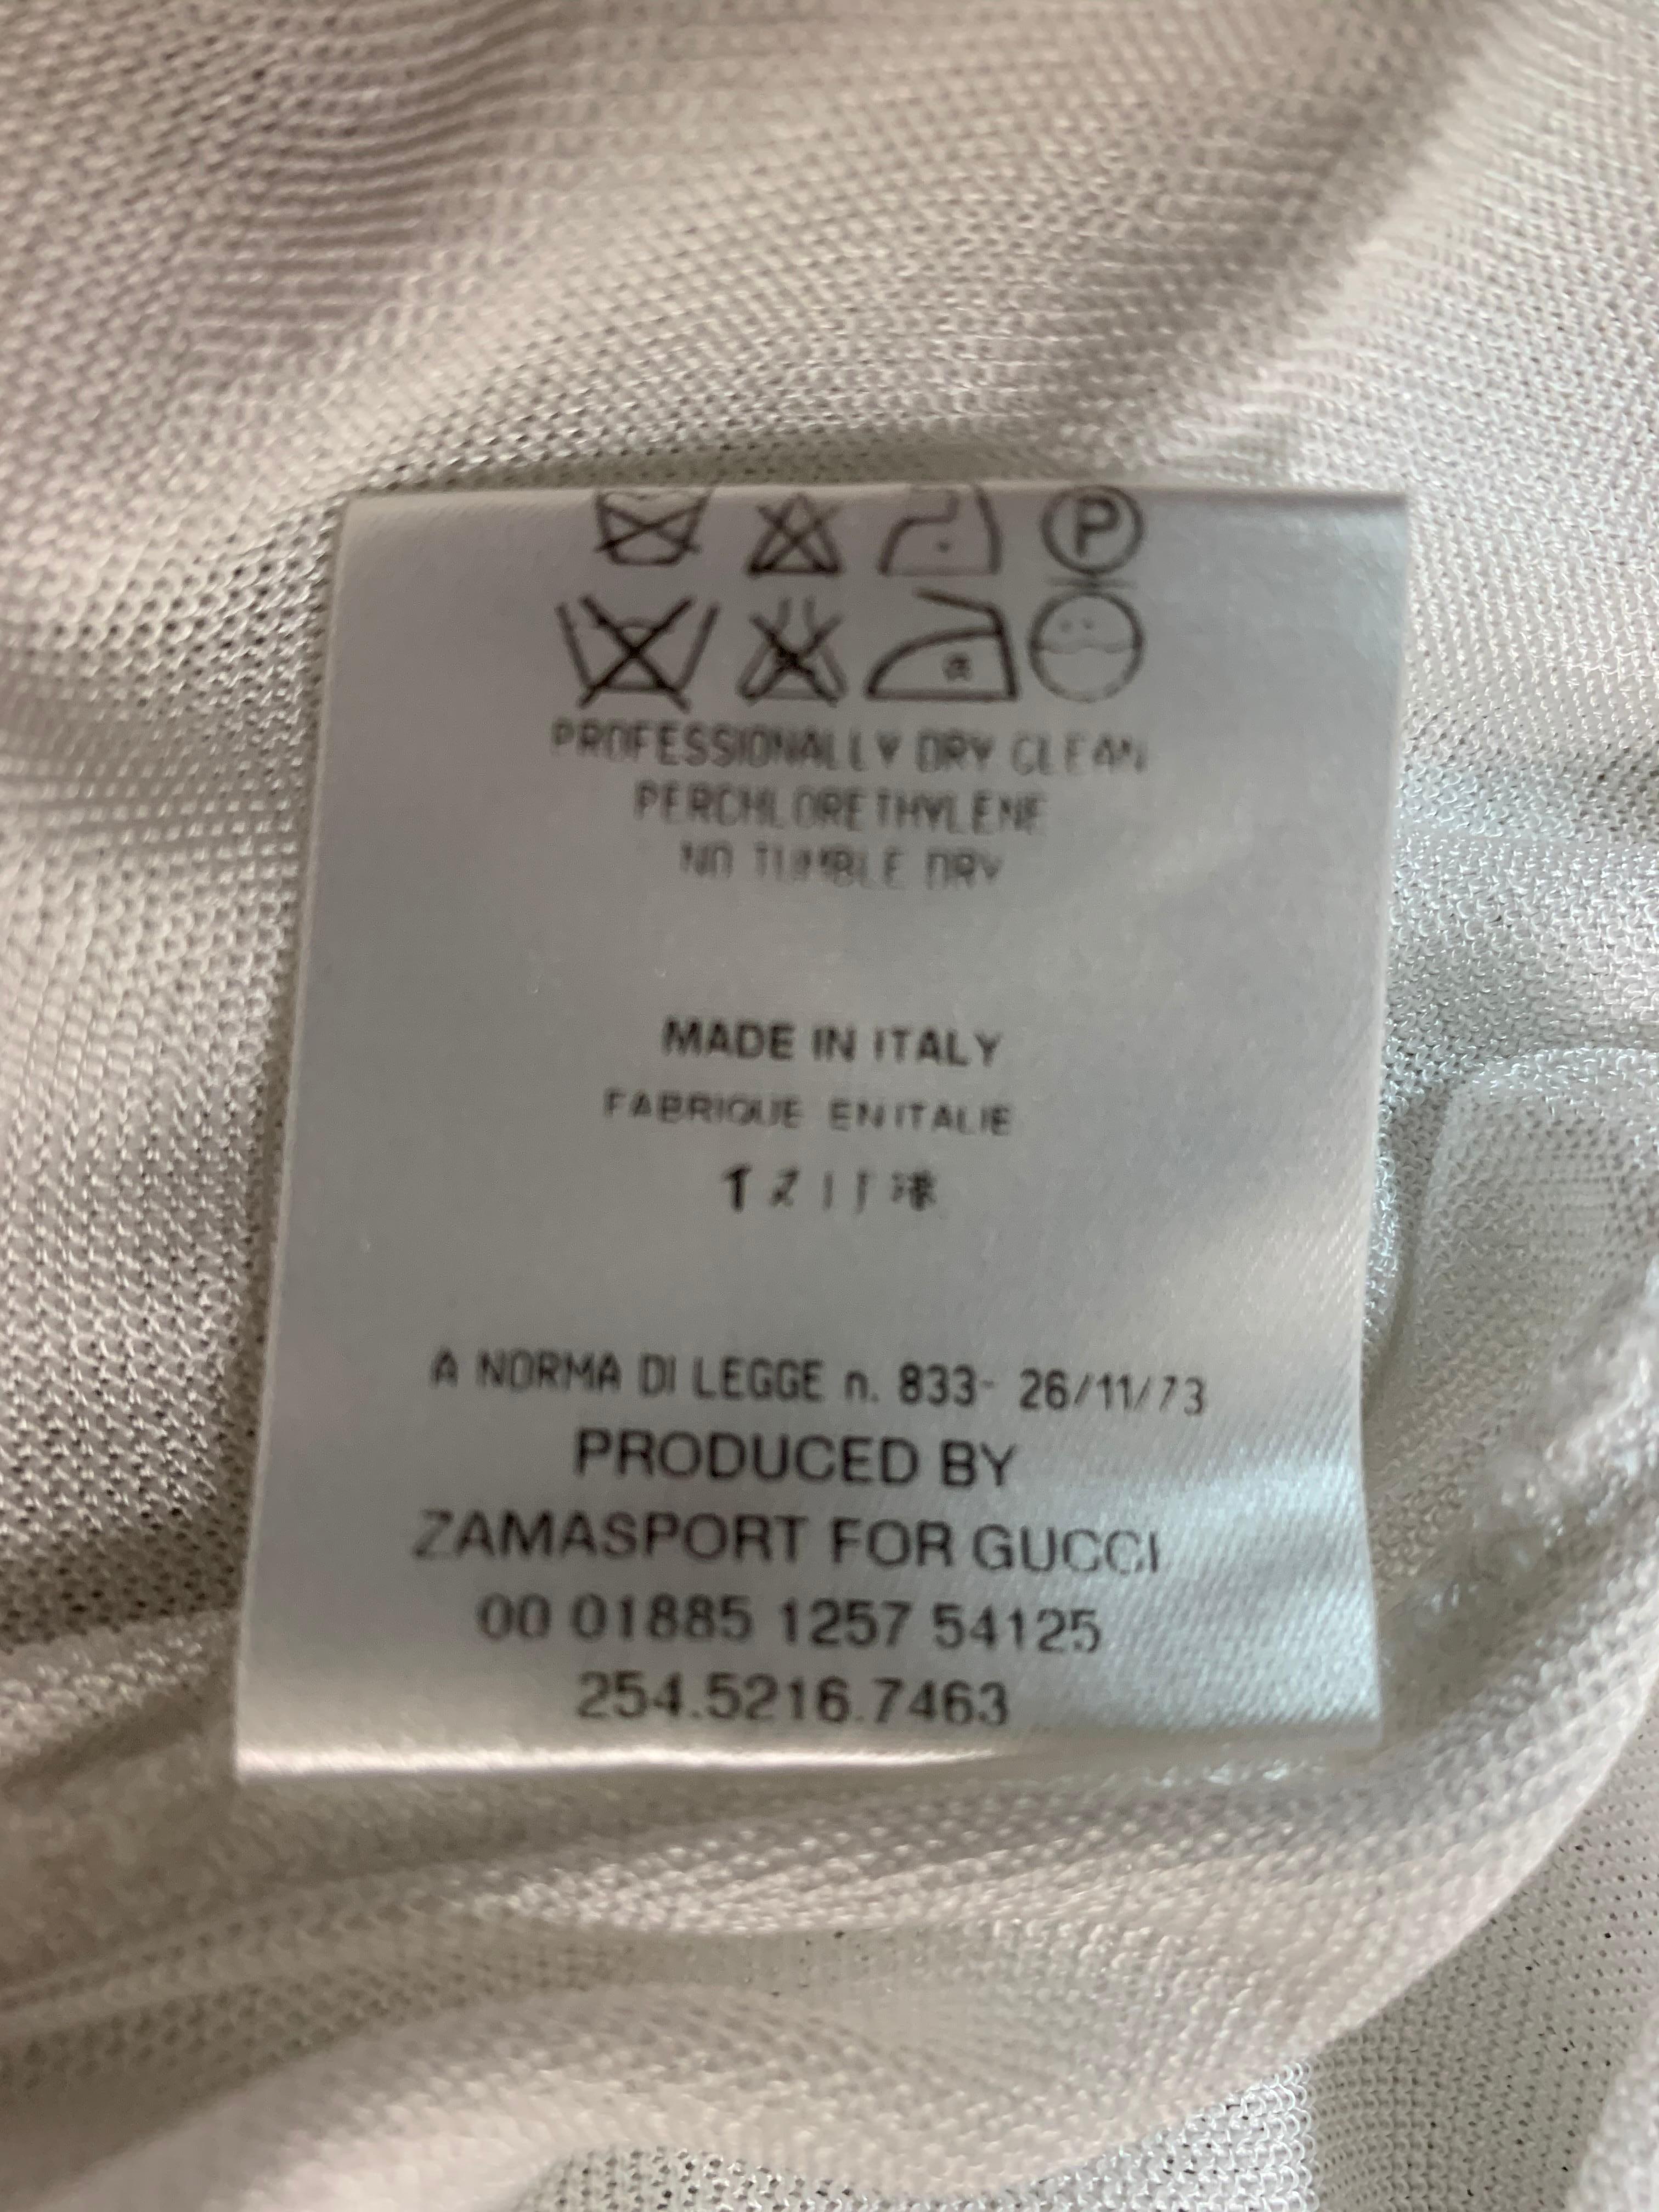 S/S 2001 Gucci Tom Ford Sheer White Jersey Plunging Back Micro Mini Dress In Good Condition In Yukon, OK